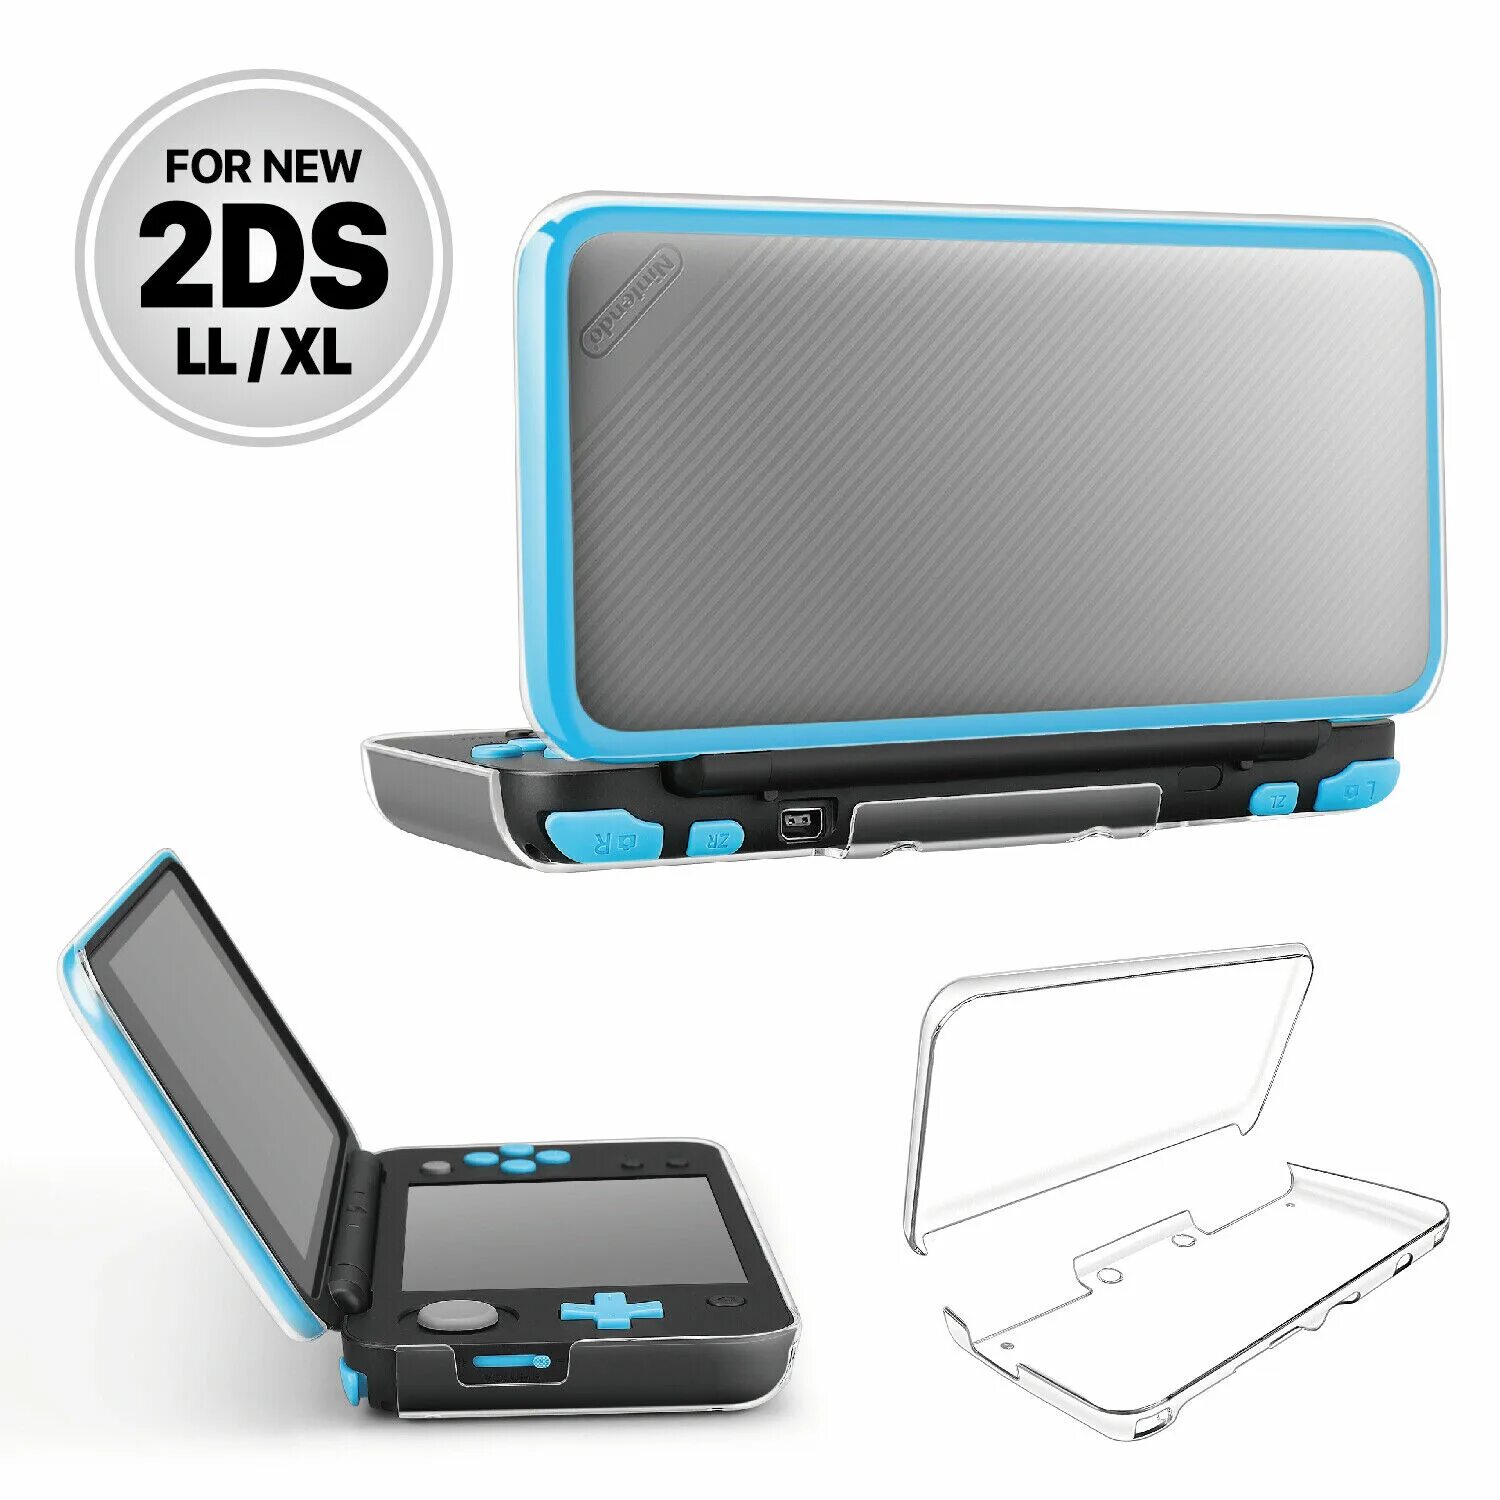 New 2ds xl. Nintendo 2ds XL. New Nintendo 2ds XL. Nintendo 2ds ll.